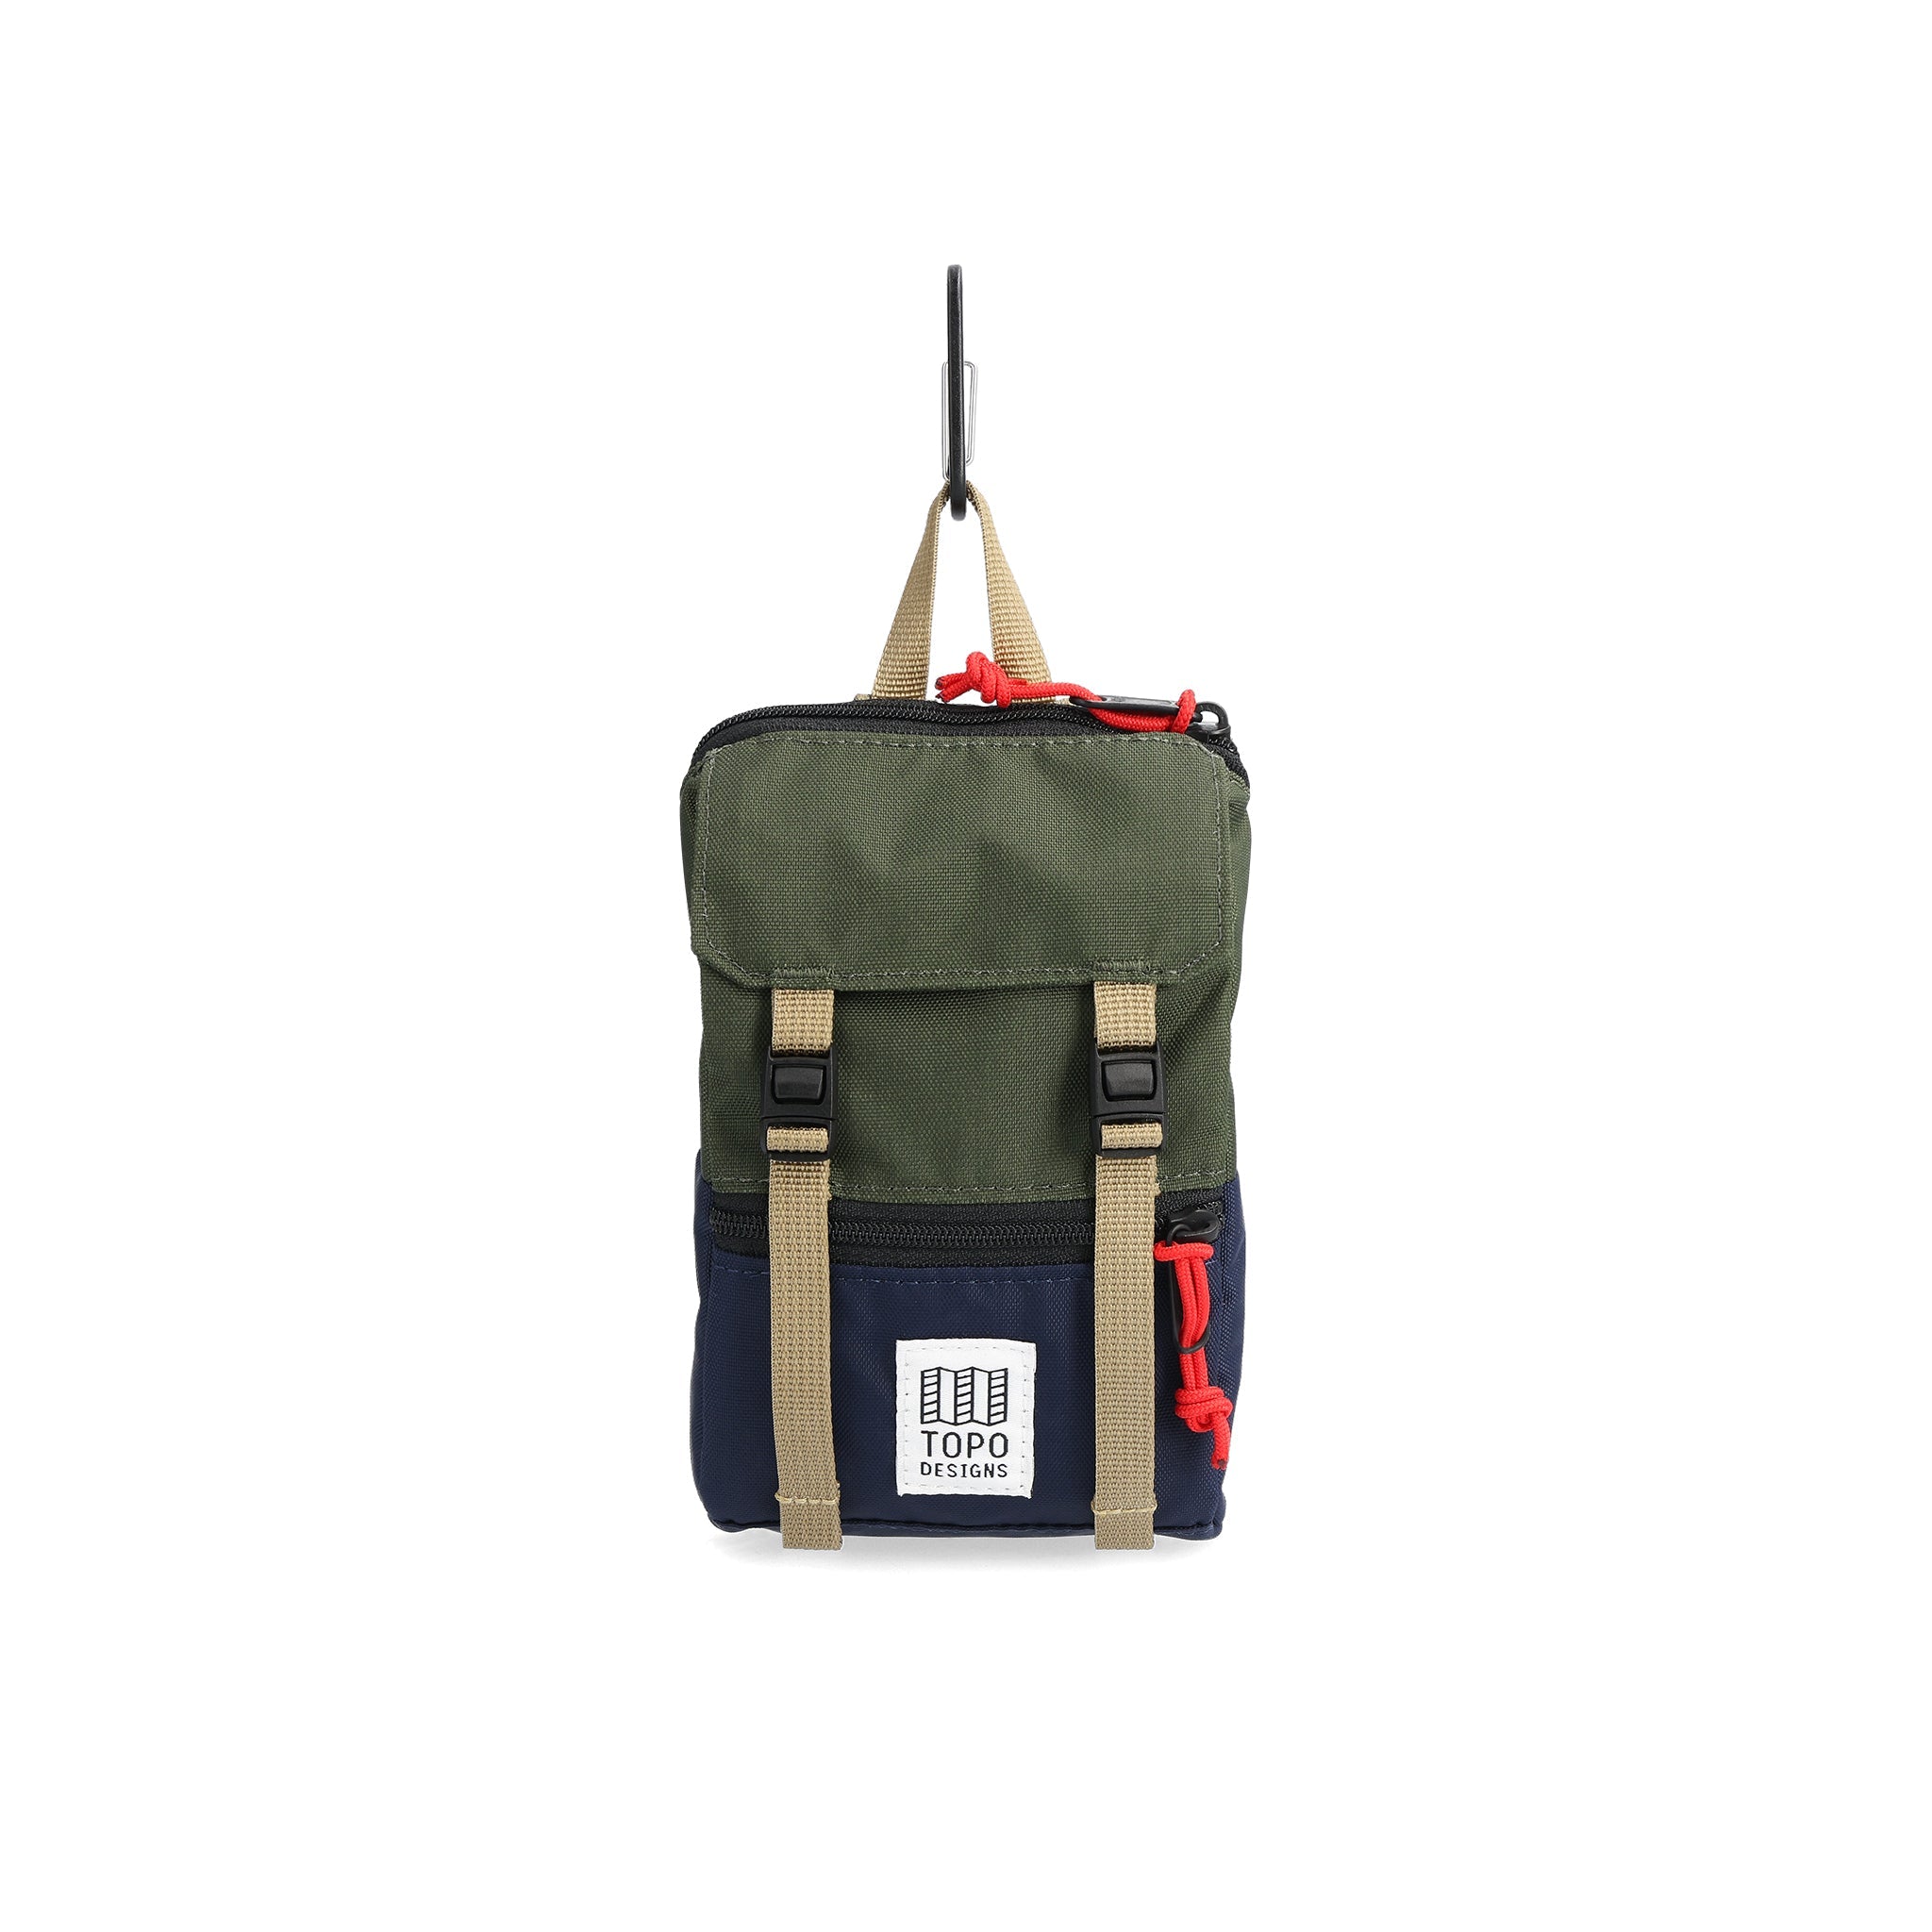 Front View of Topo Designs Rover Pack Micro in "Olive / Navy"